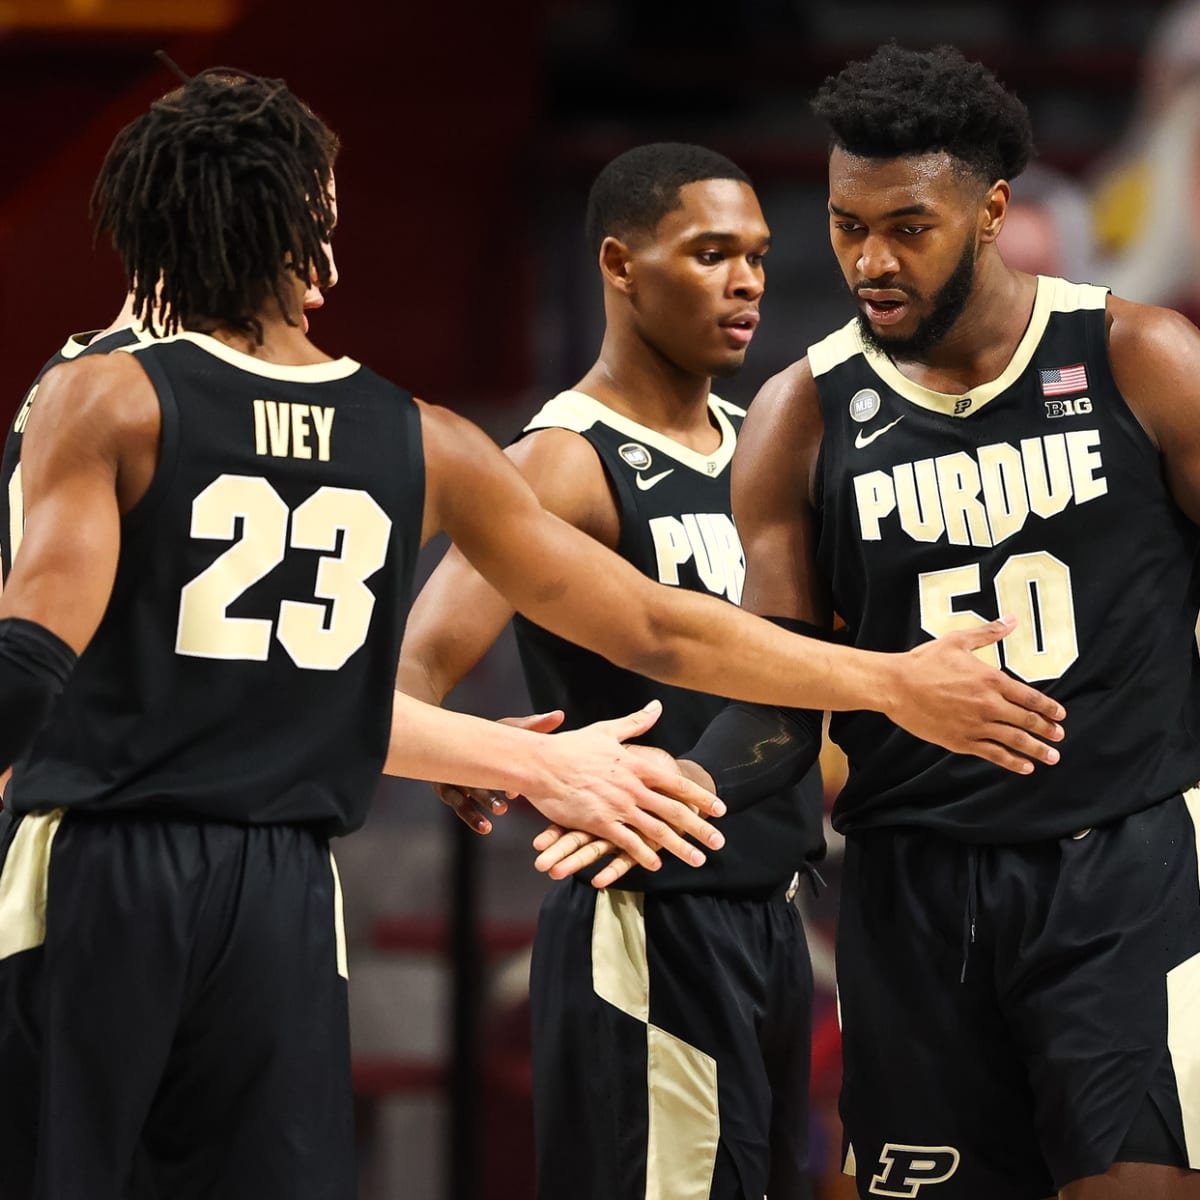 Purdue Basketball Gear, Purdue Boilermakers College Basketball Jerseys,  March Madness Gear